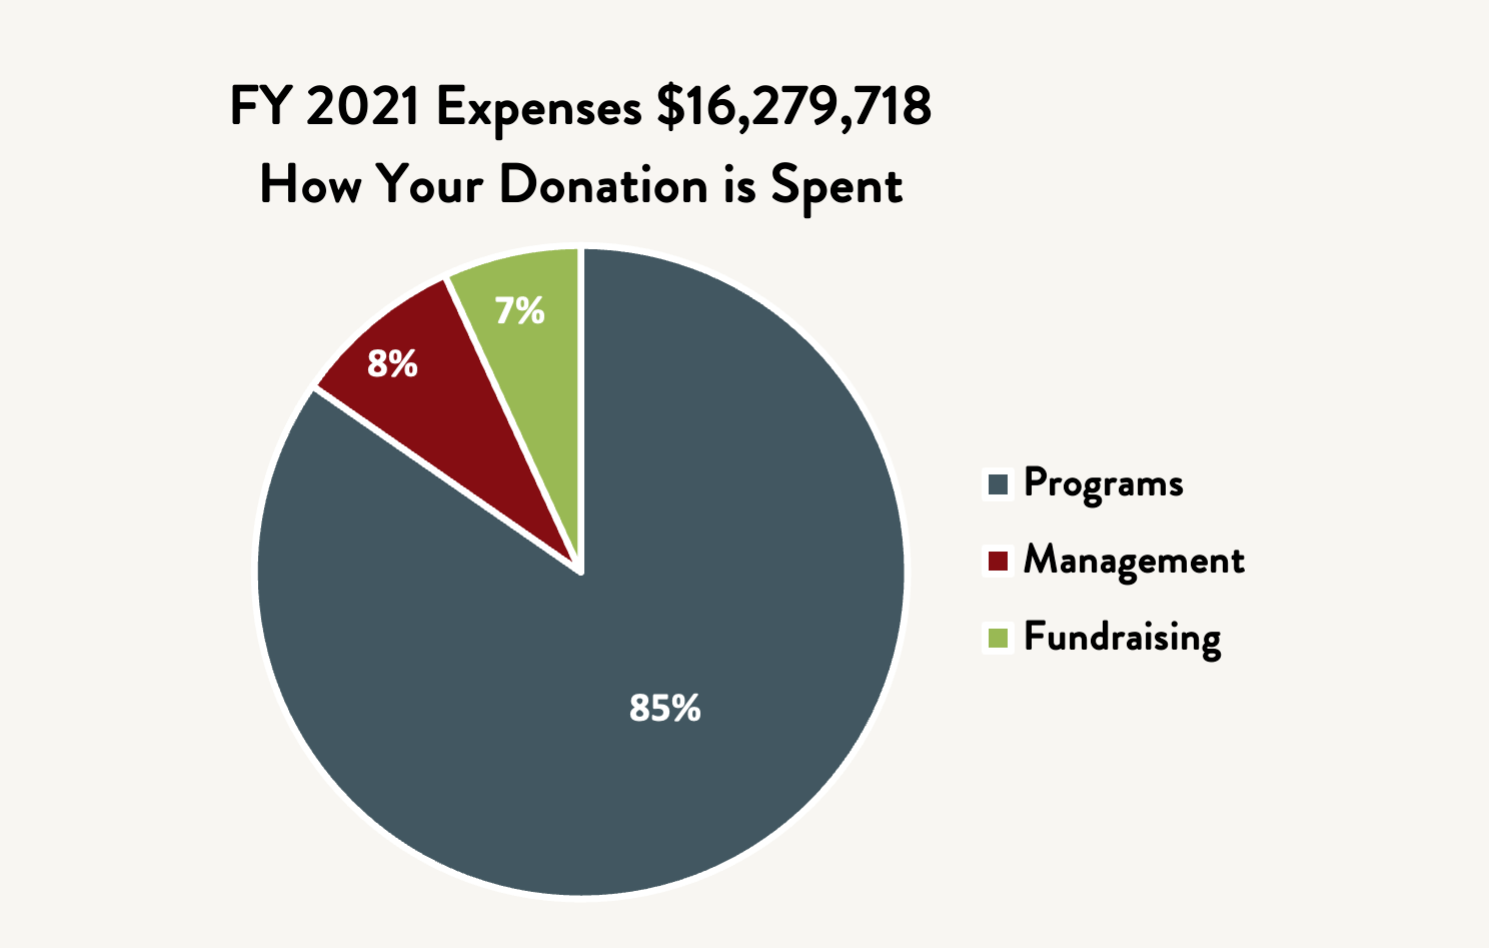 Chart titled "FY 2021 Expenses $16,279,718 How Your Donation is Spent." The chart shows 85% Programs, 8% Management, and 7% Fundraising.